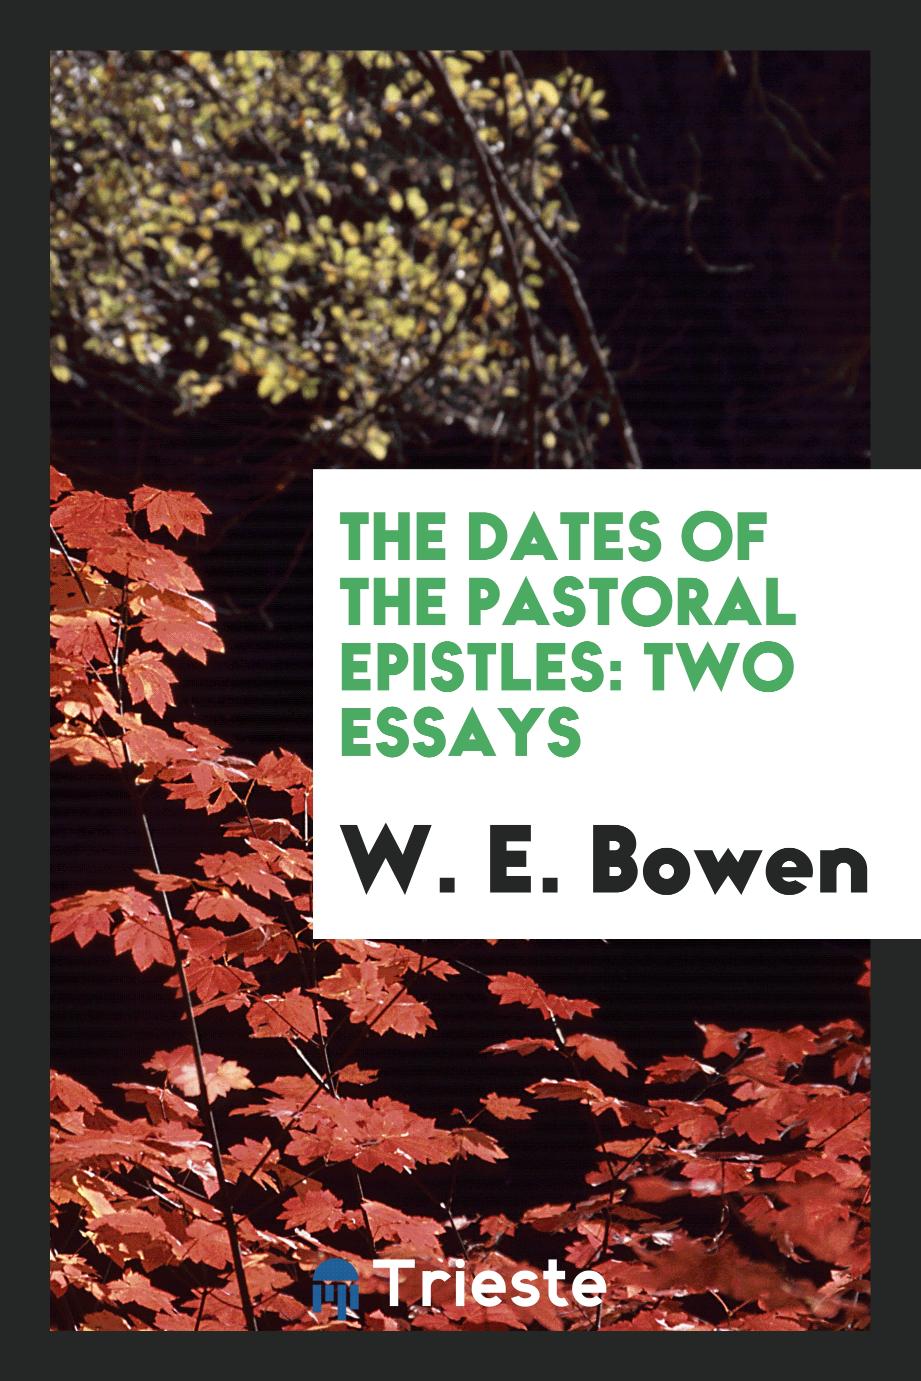 The Dates of the Pastoral Epistles: Two Essays